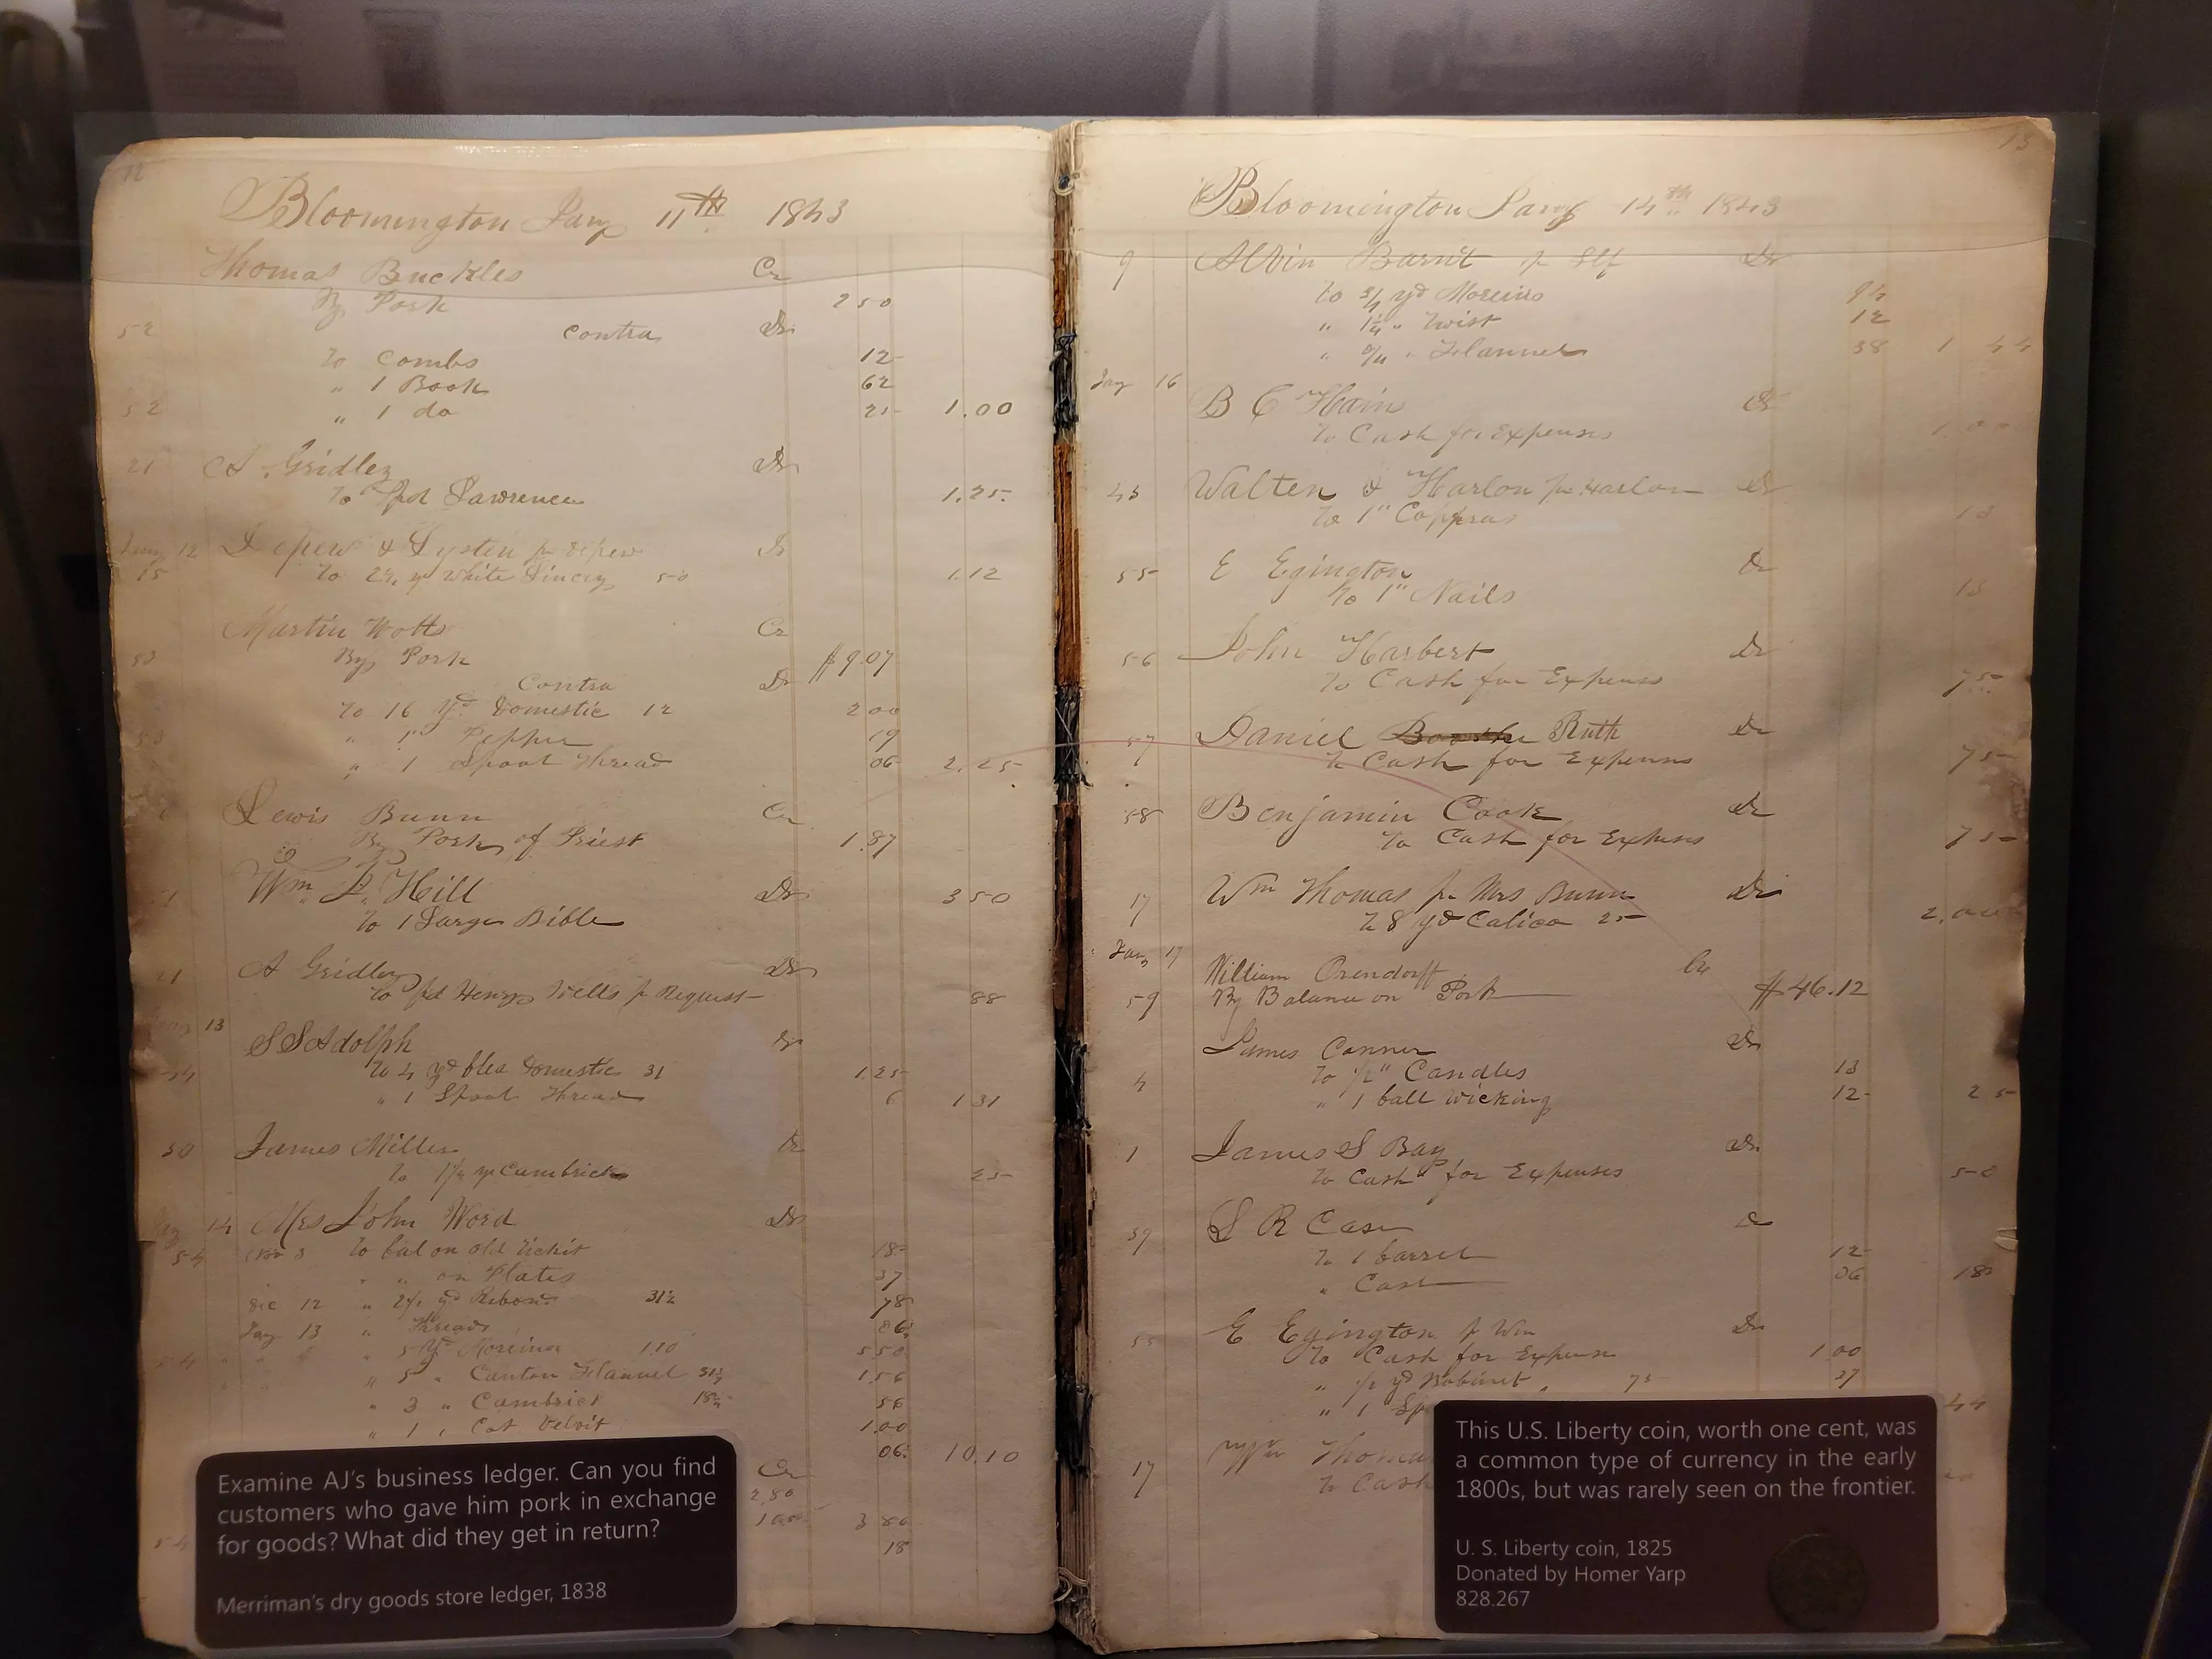 Photo of the ledger from Merriman's store.